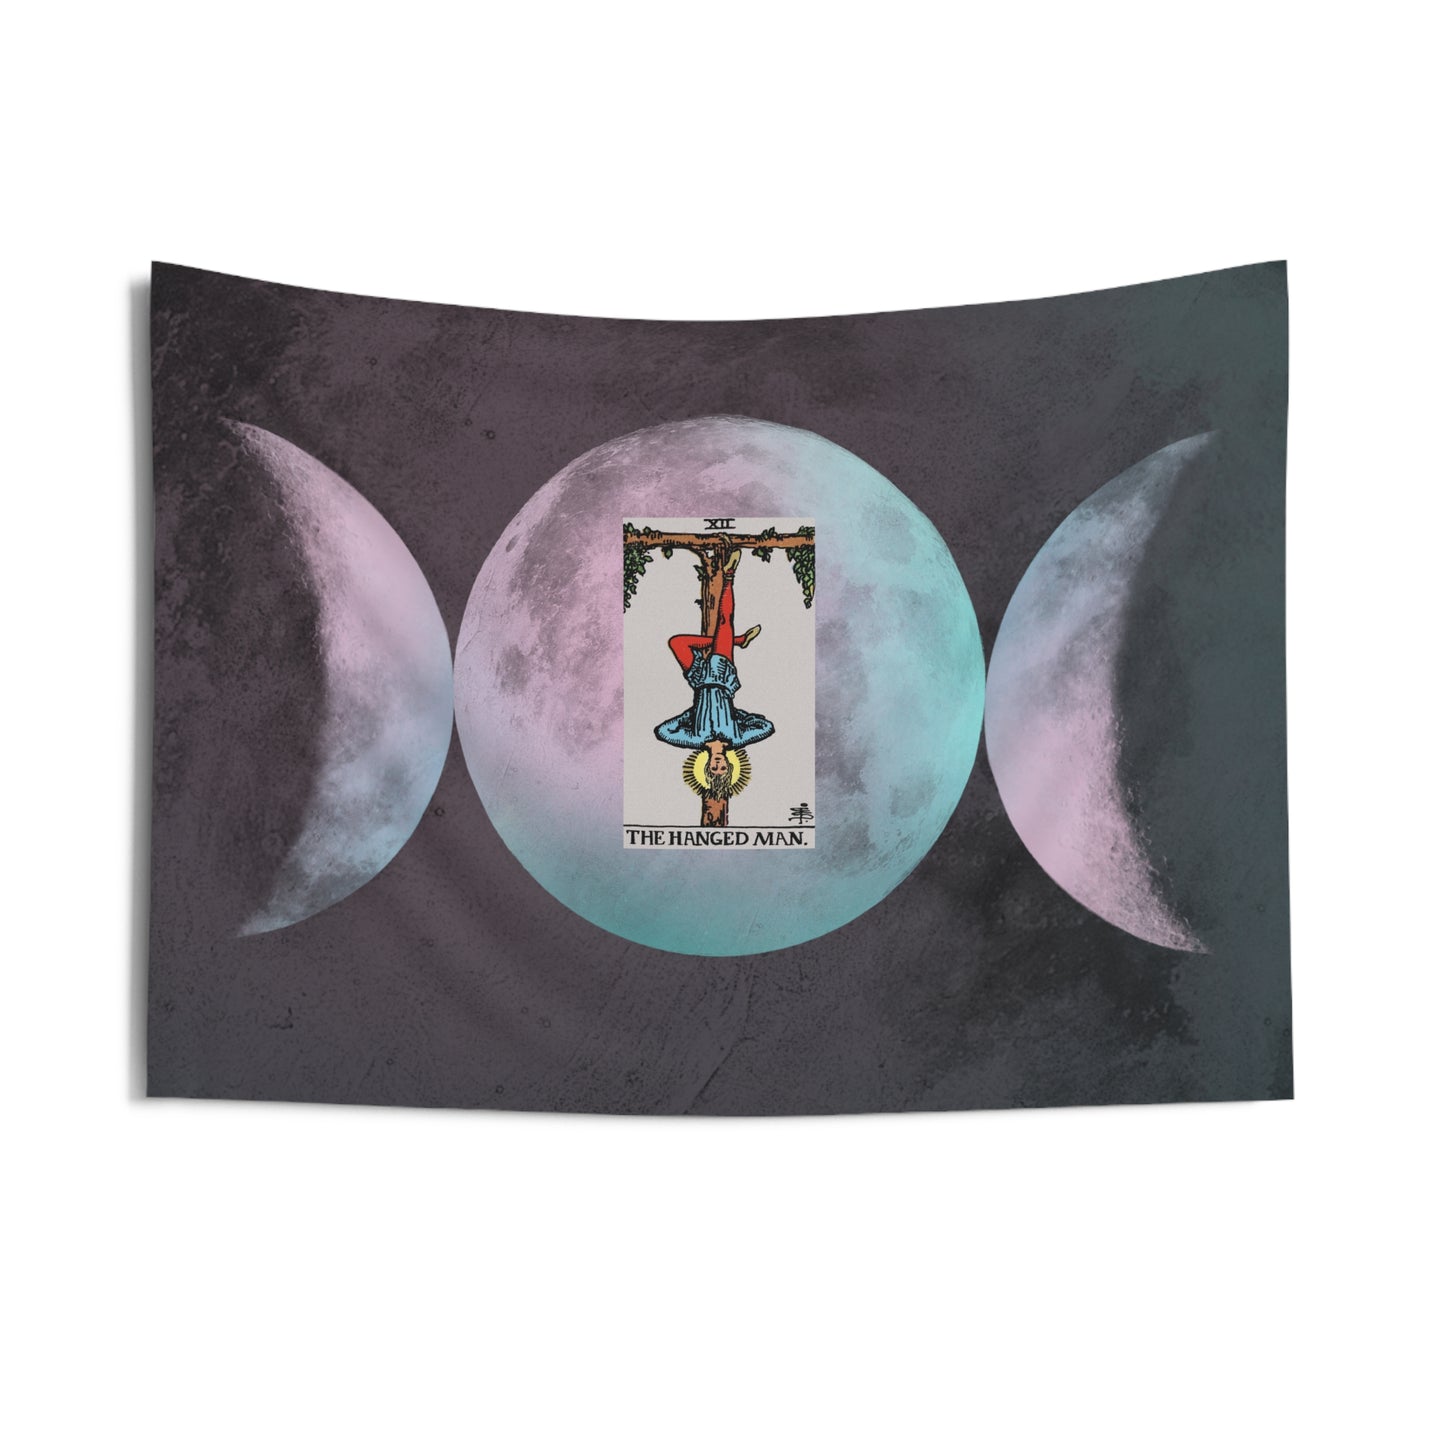 The Hanged Man Tarot Card Altar Cloth or Tapestry with Triple Goddess Symbol